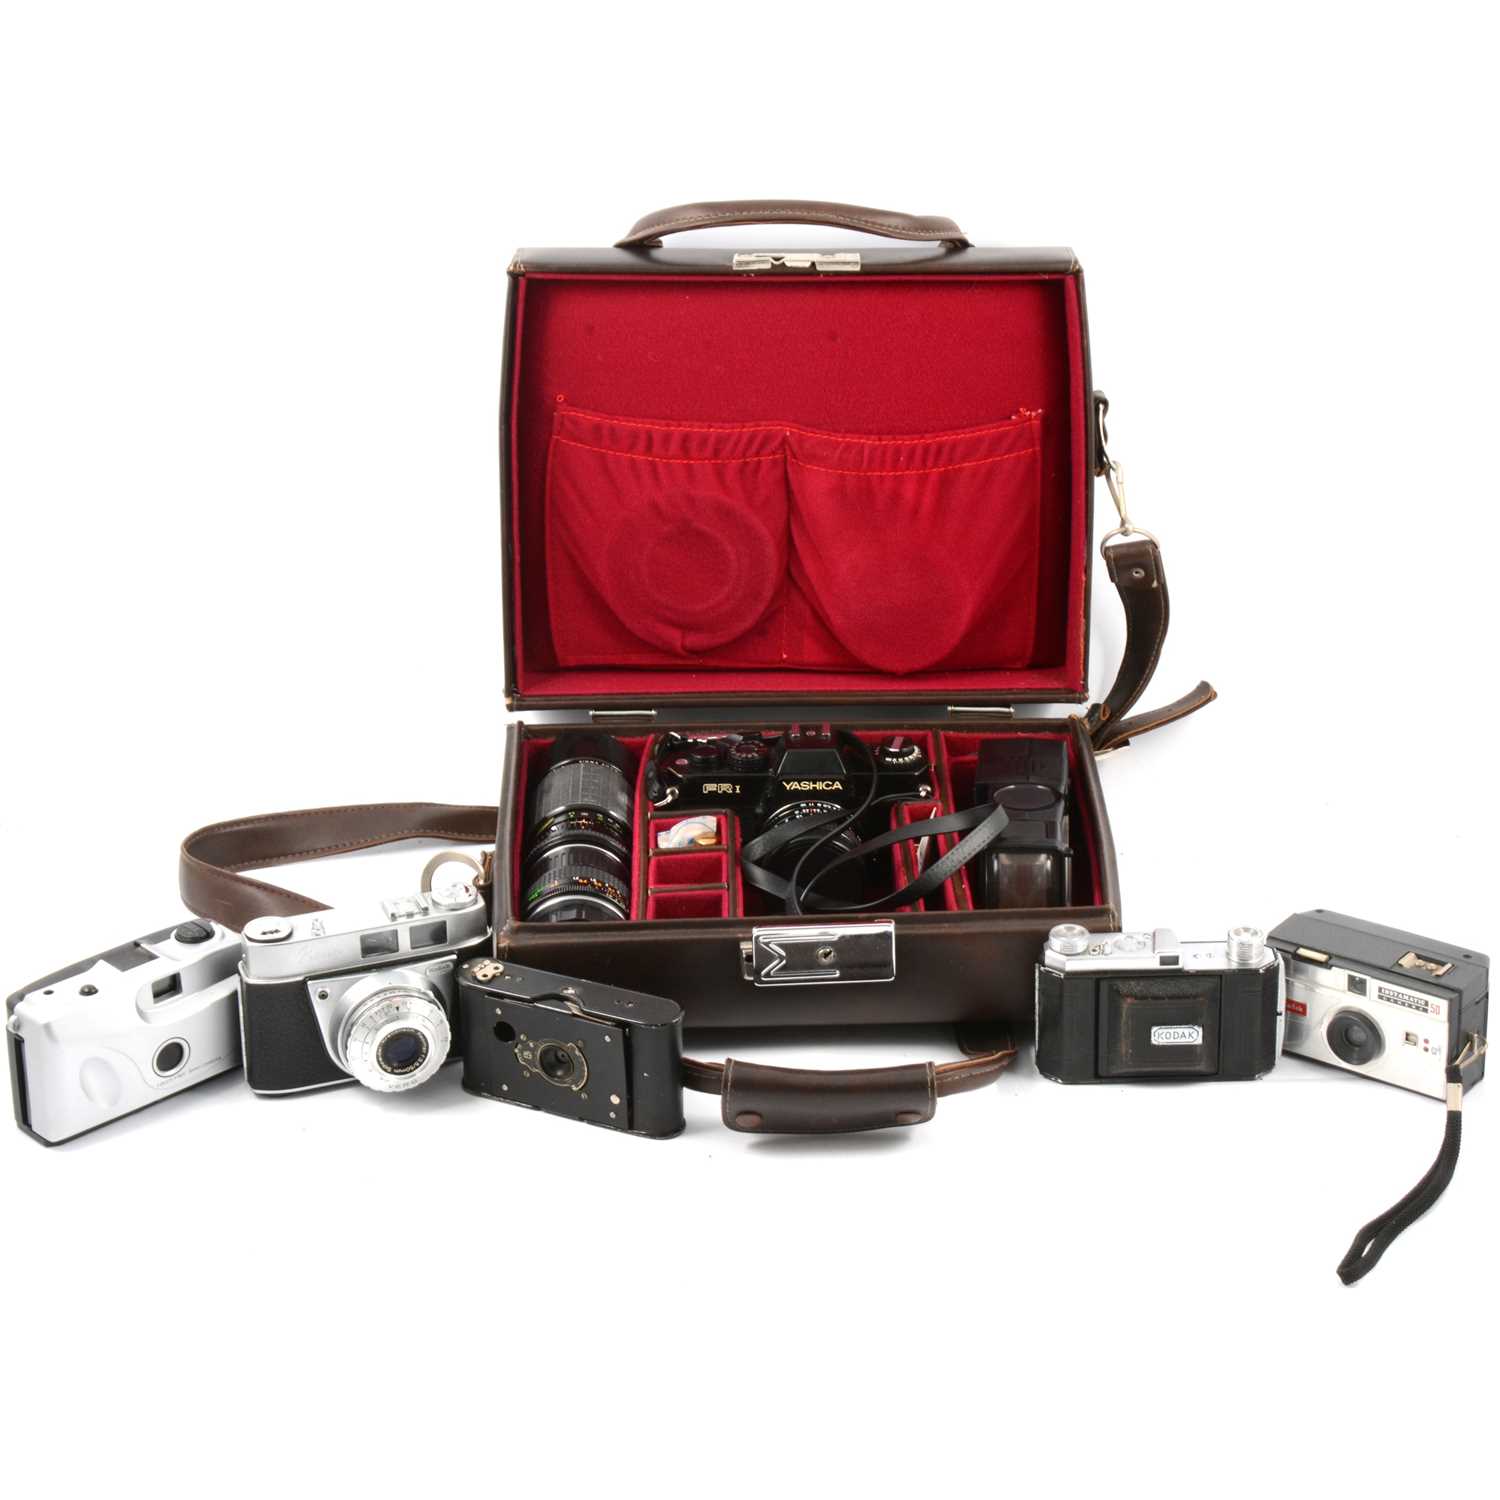 Lot 123 - Vintage film cameras and accessories, including Yashica FR1 with two lenses and flash, cased